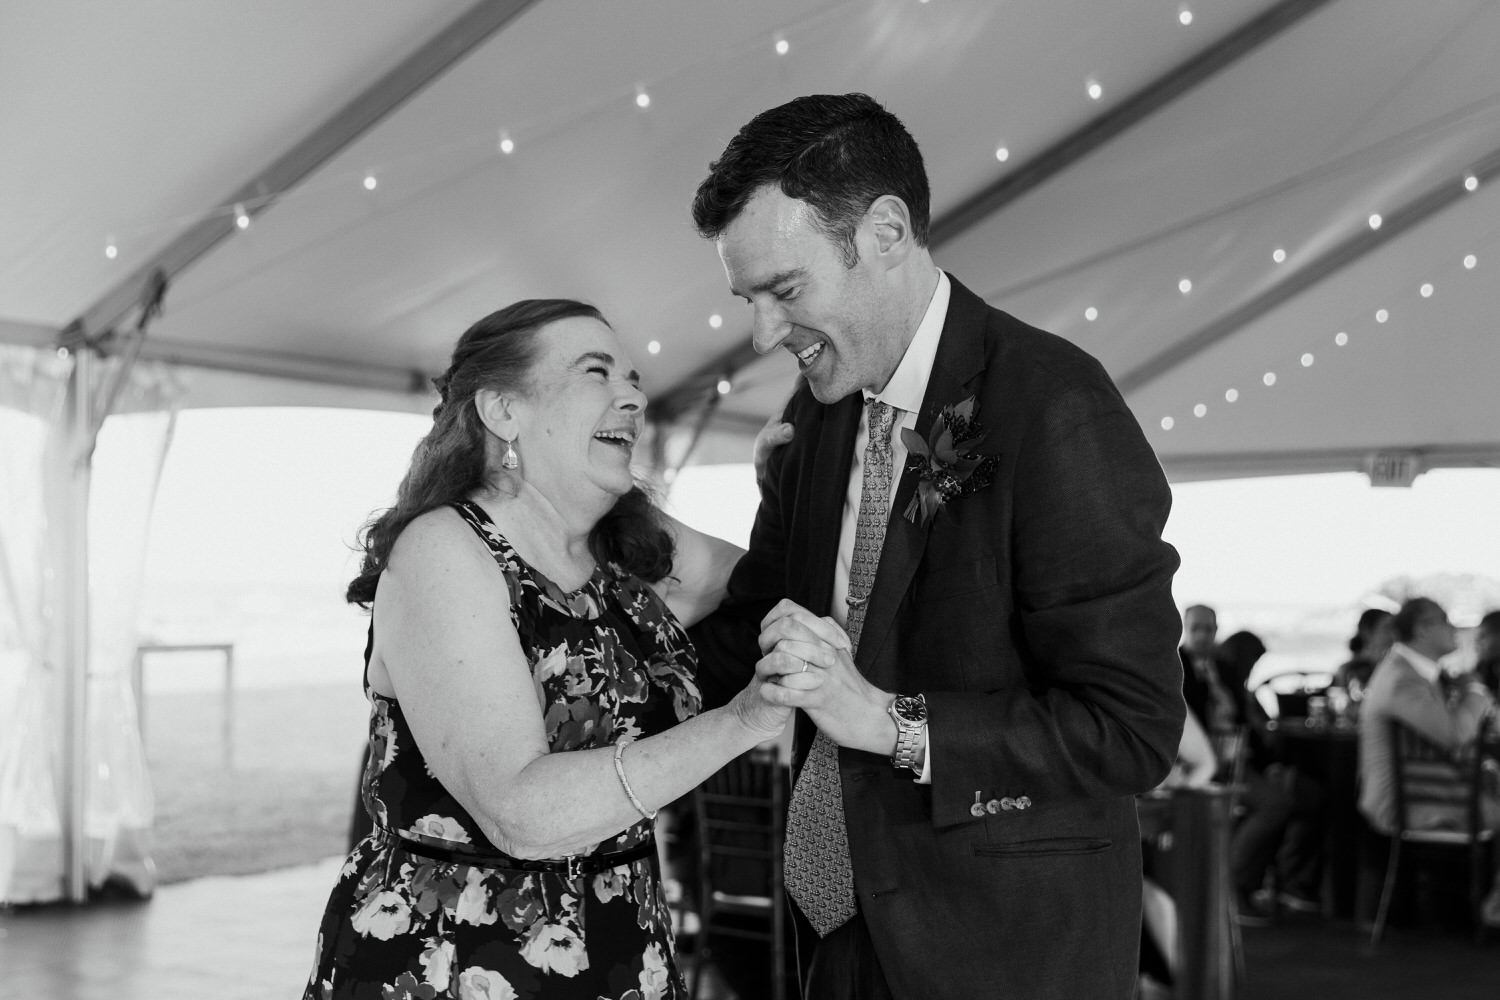 mother-son dance at wedding at Seacoast Science Center